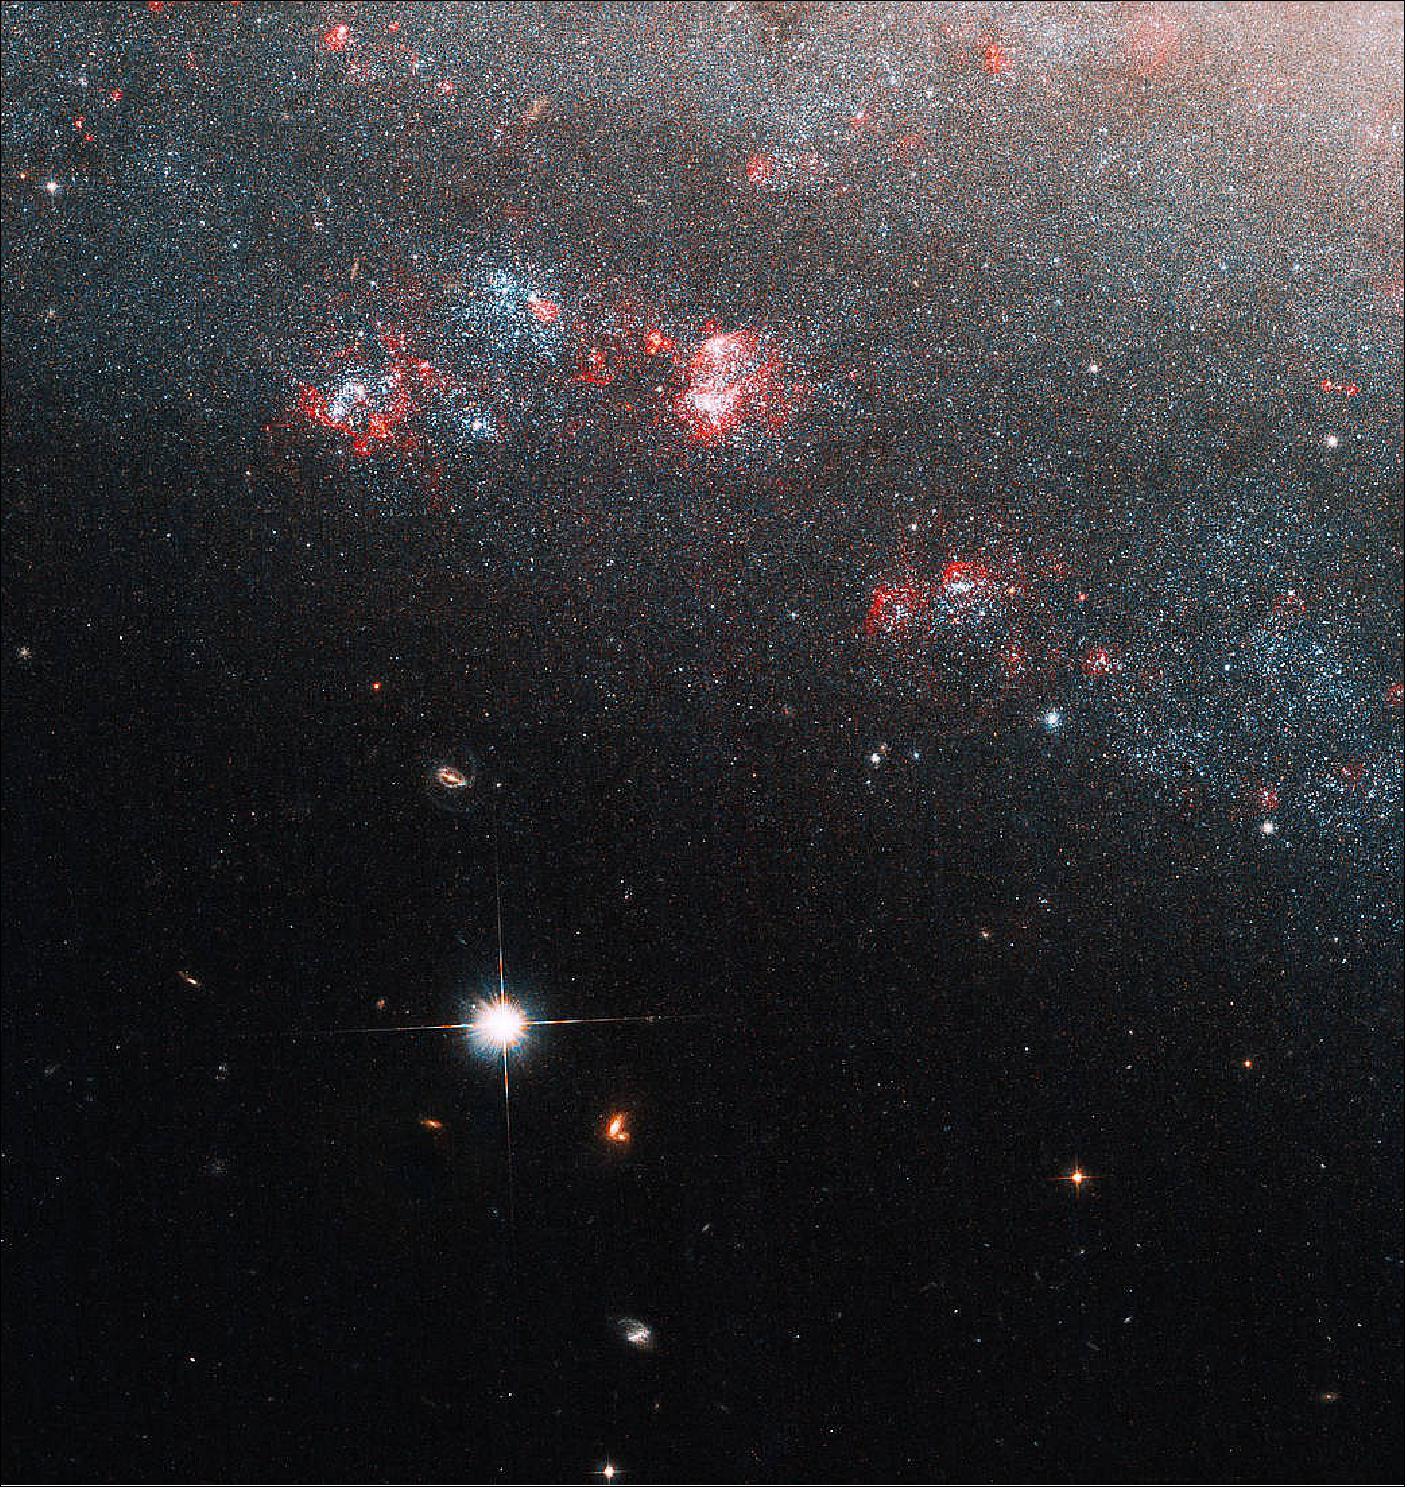 Figure 44: This image zooms into the very edge of the galaxy, on the opposite side of the void. Below the edge of the galaxy’s disk, smaller and more distant galaxies are visible, as well as a very bright foreground star that lies between us and NGC 247. Bright red indicates areas of high-density gas and dust, and robust star formation rather close to the edge of the galaxy [image credit: NASA, ESA, and H. Feng (Tsinghua University); Image processing: G. Kober (NASA Goddard/Catholic University of America)]